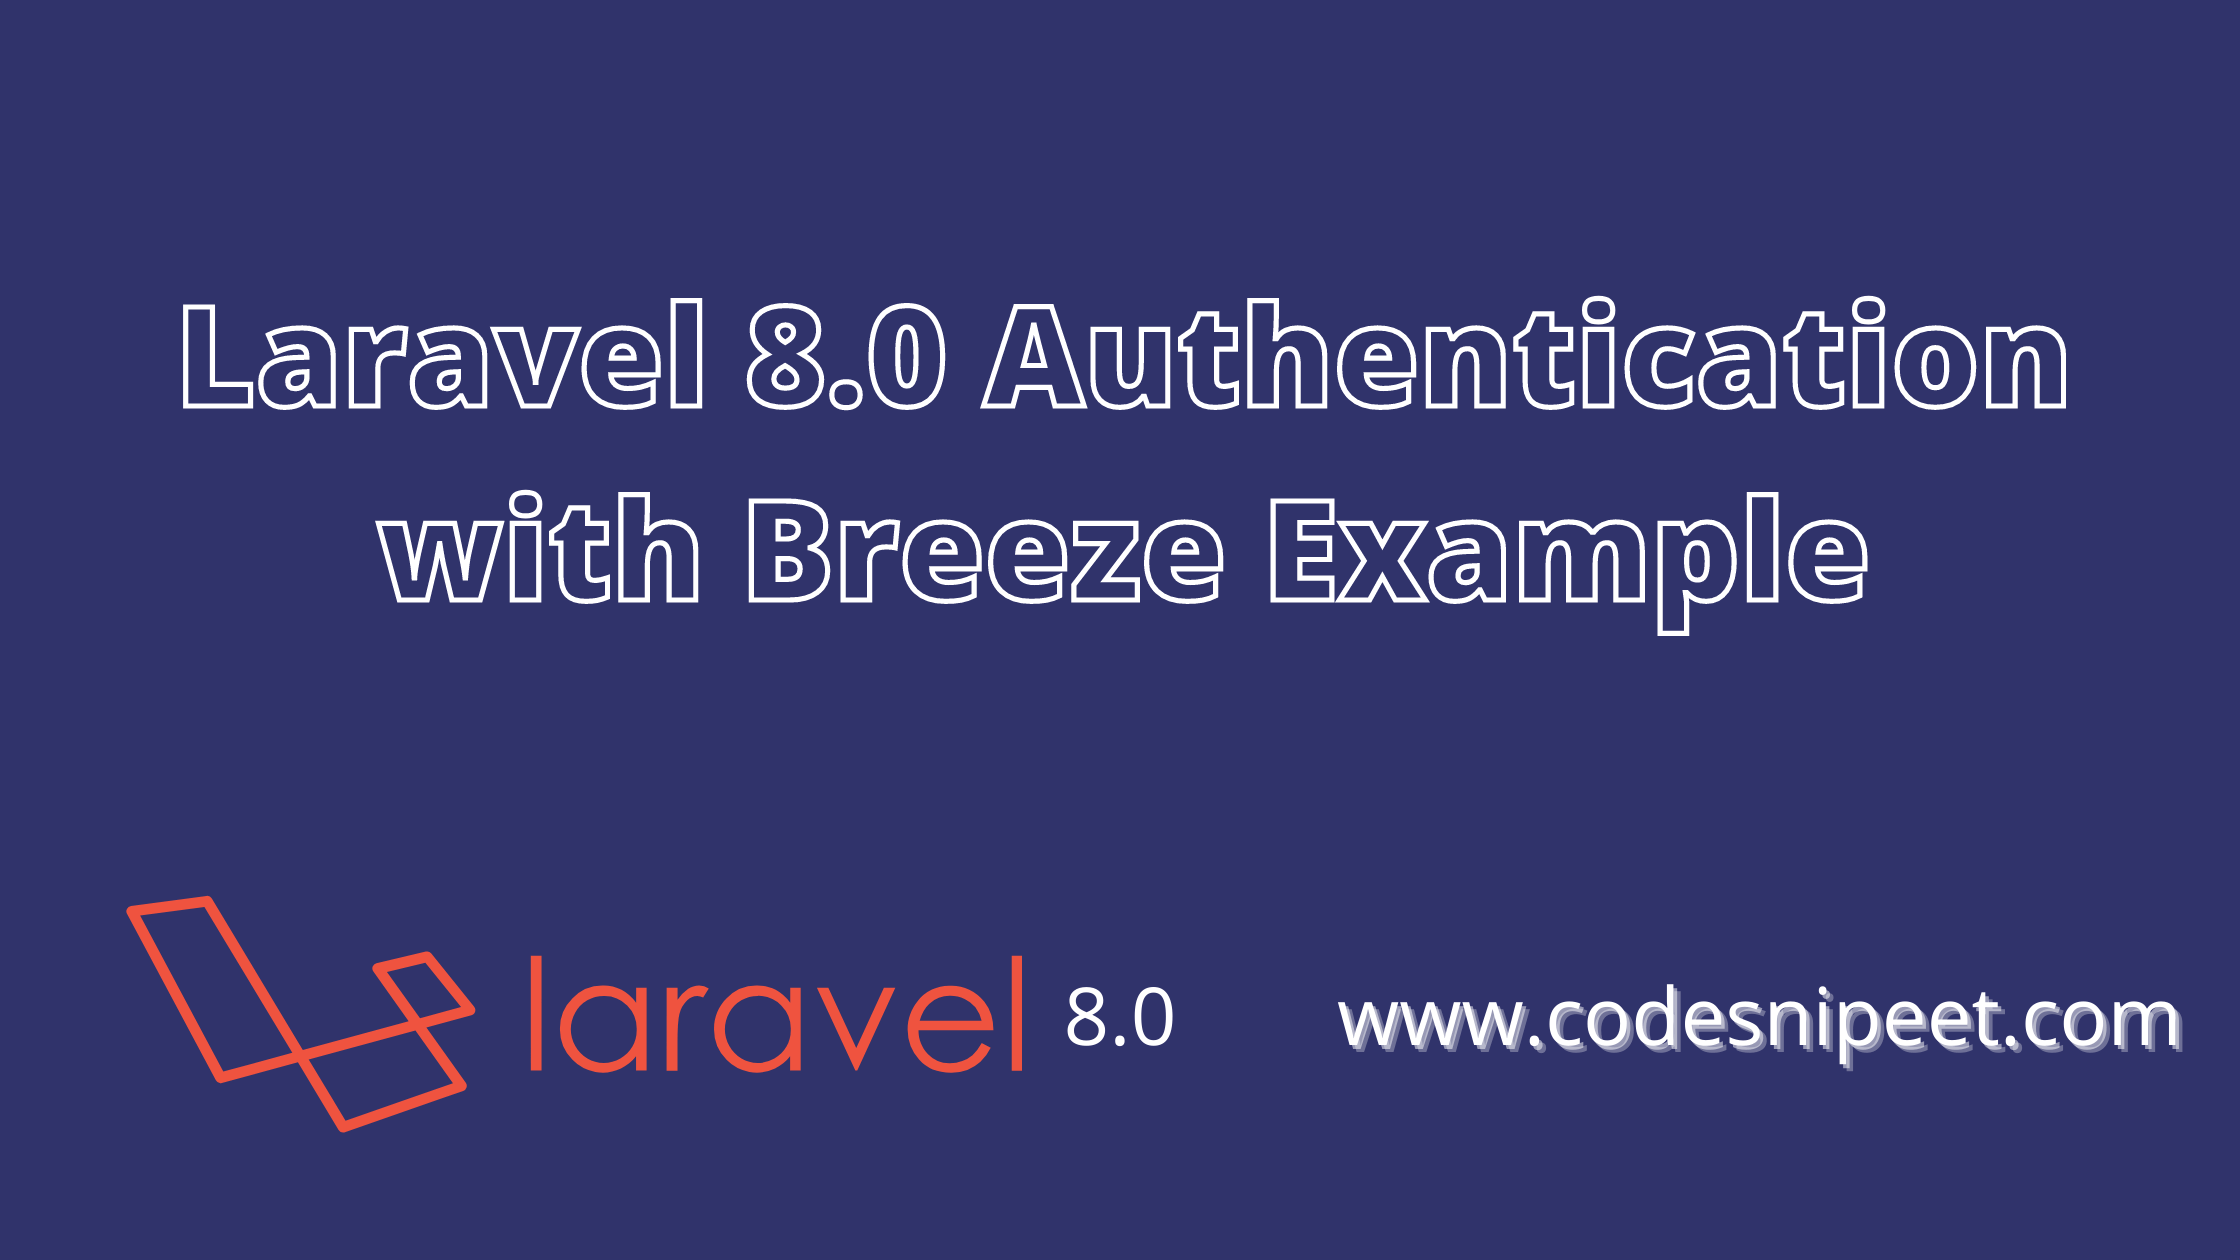 You are currently viewing Laravel 8.0 Authentication with Breeze Example